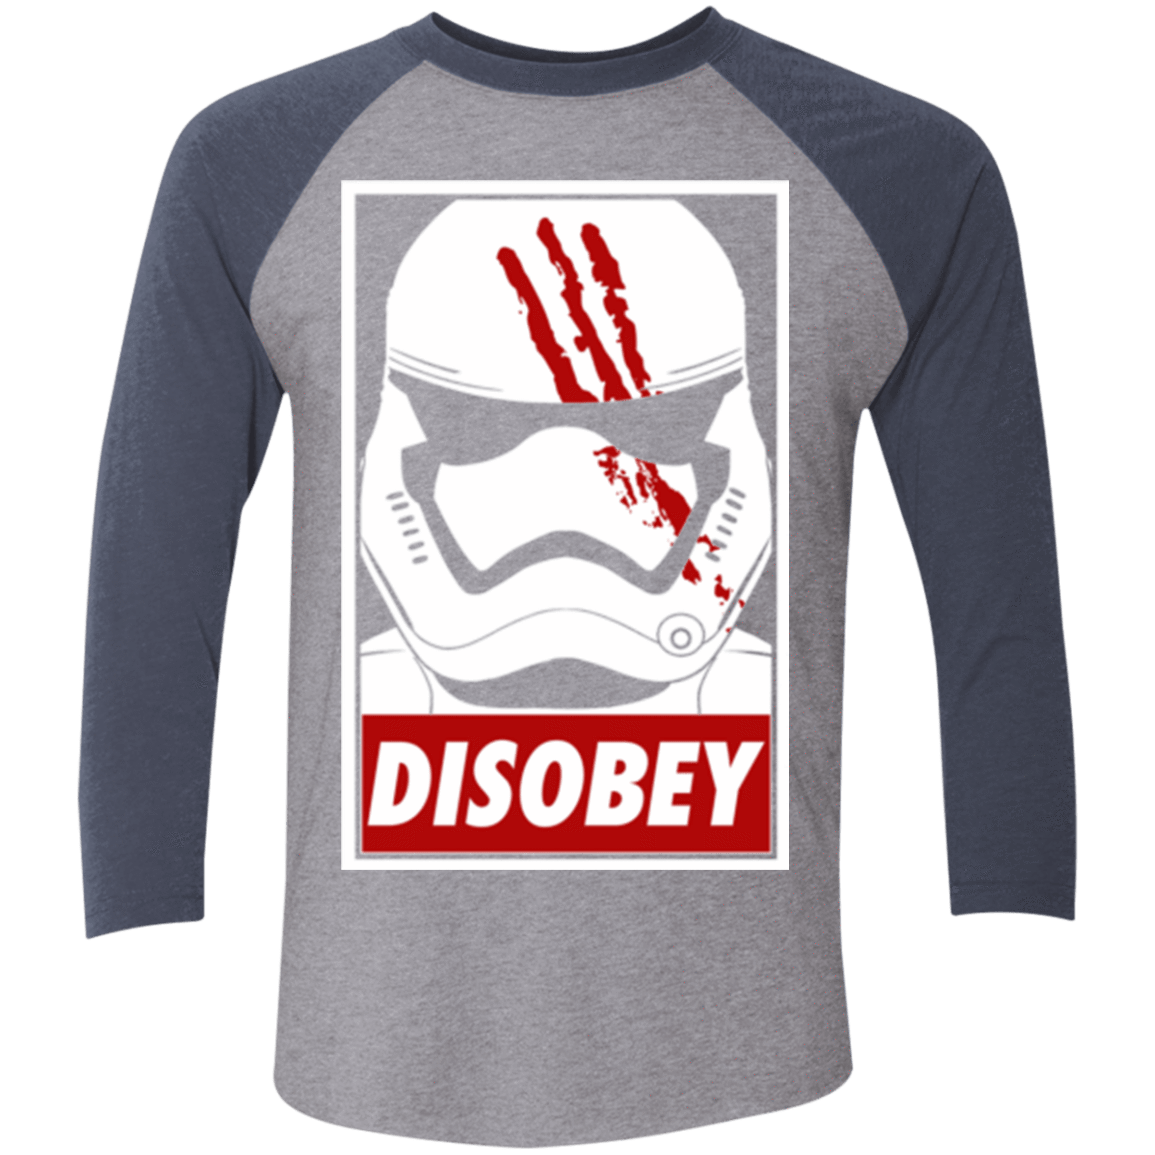 T-Shirts Premium Heather/ Vintage Navy / X-Small Disobey Men's Triblend 3/4 Sleeve